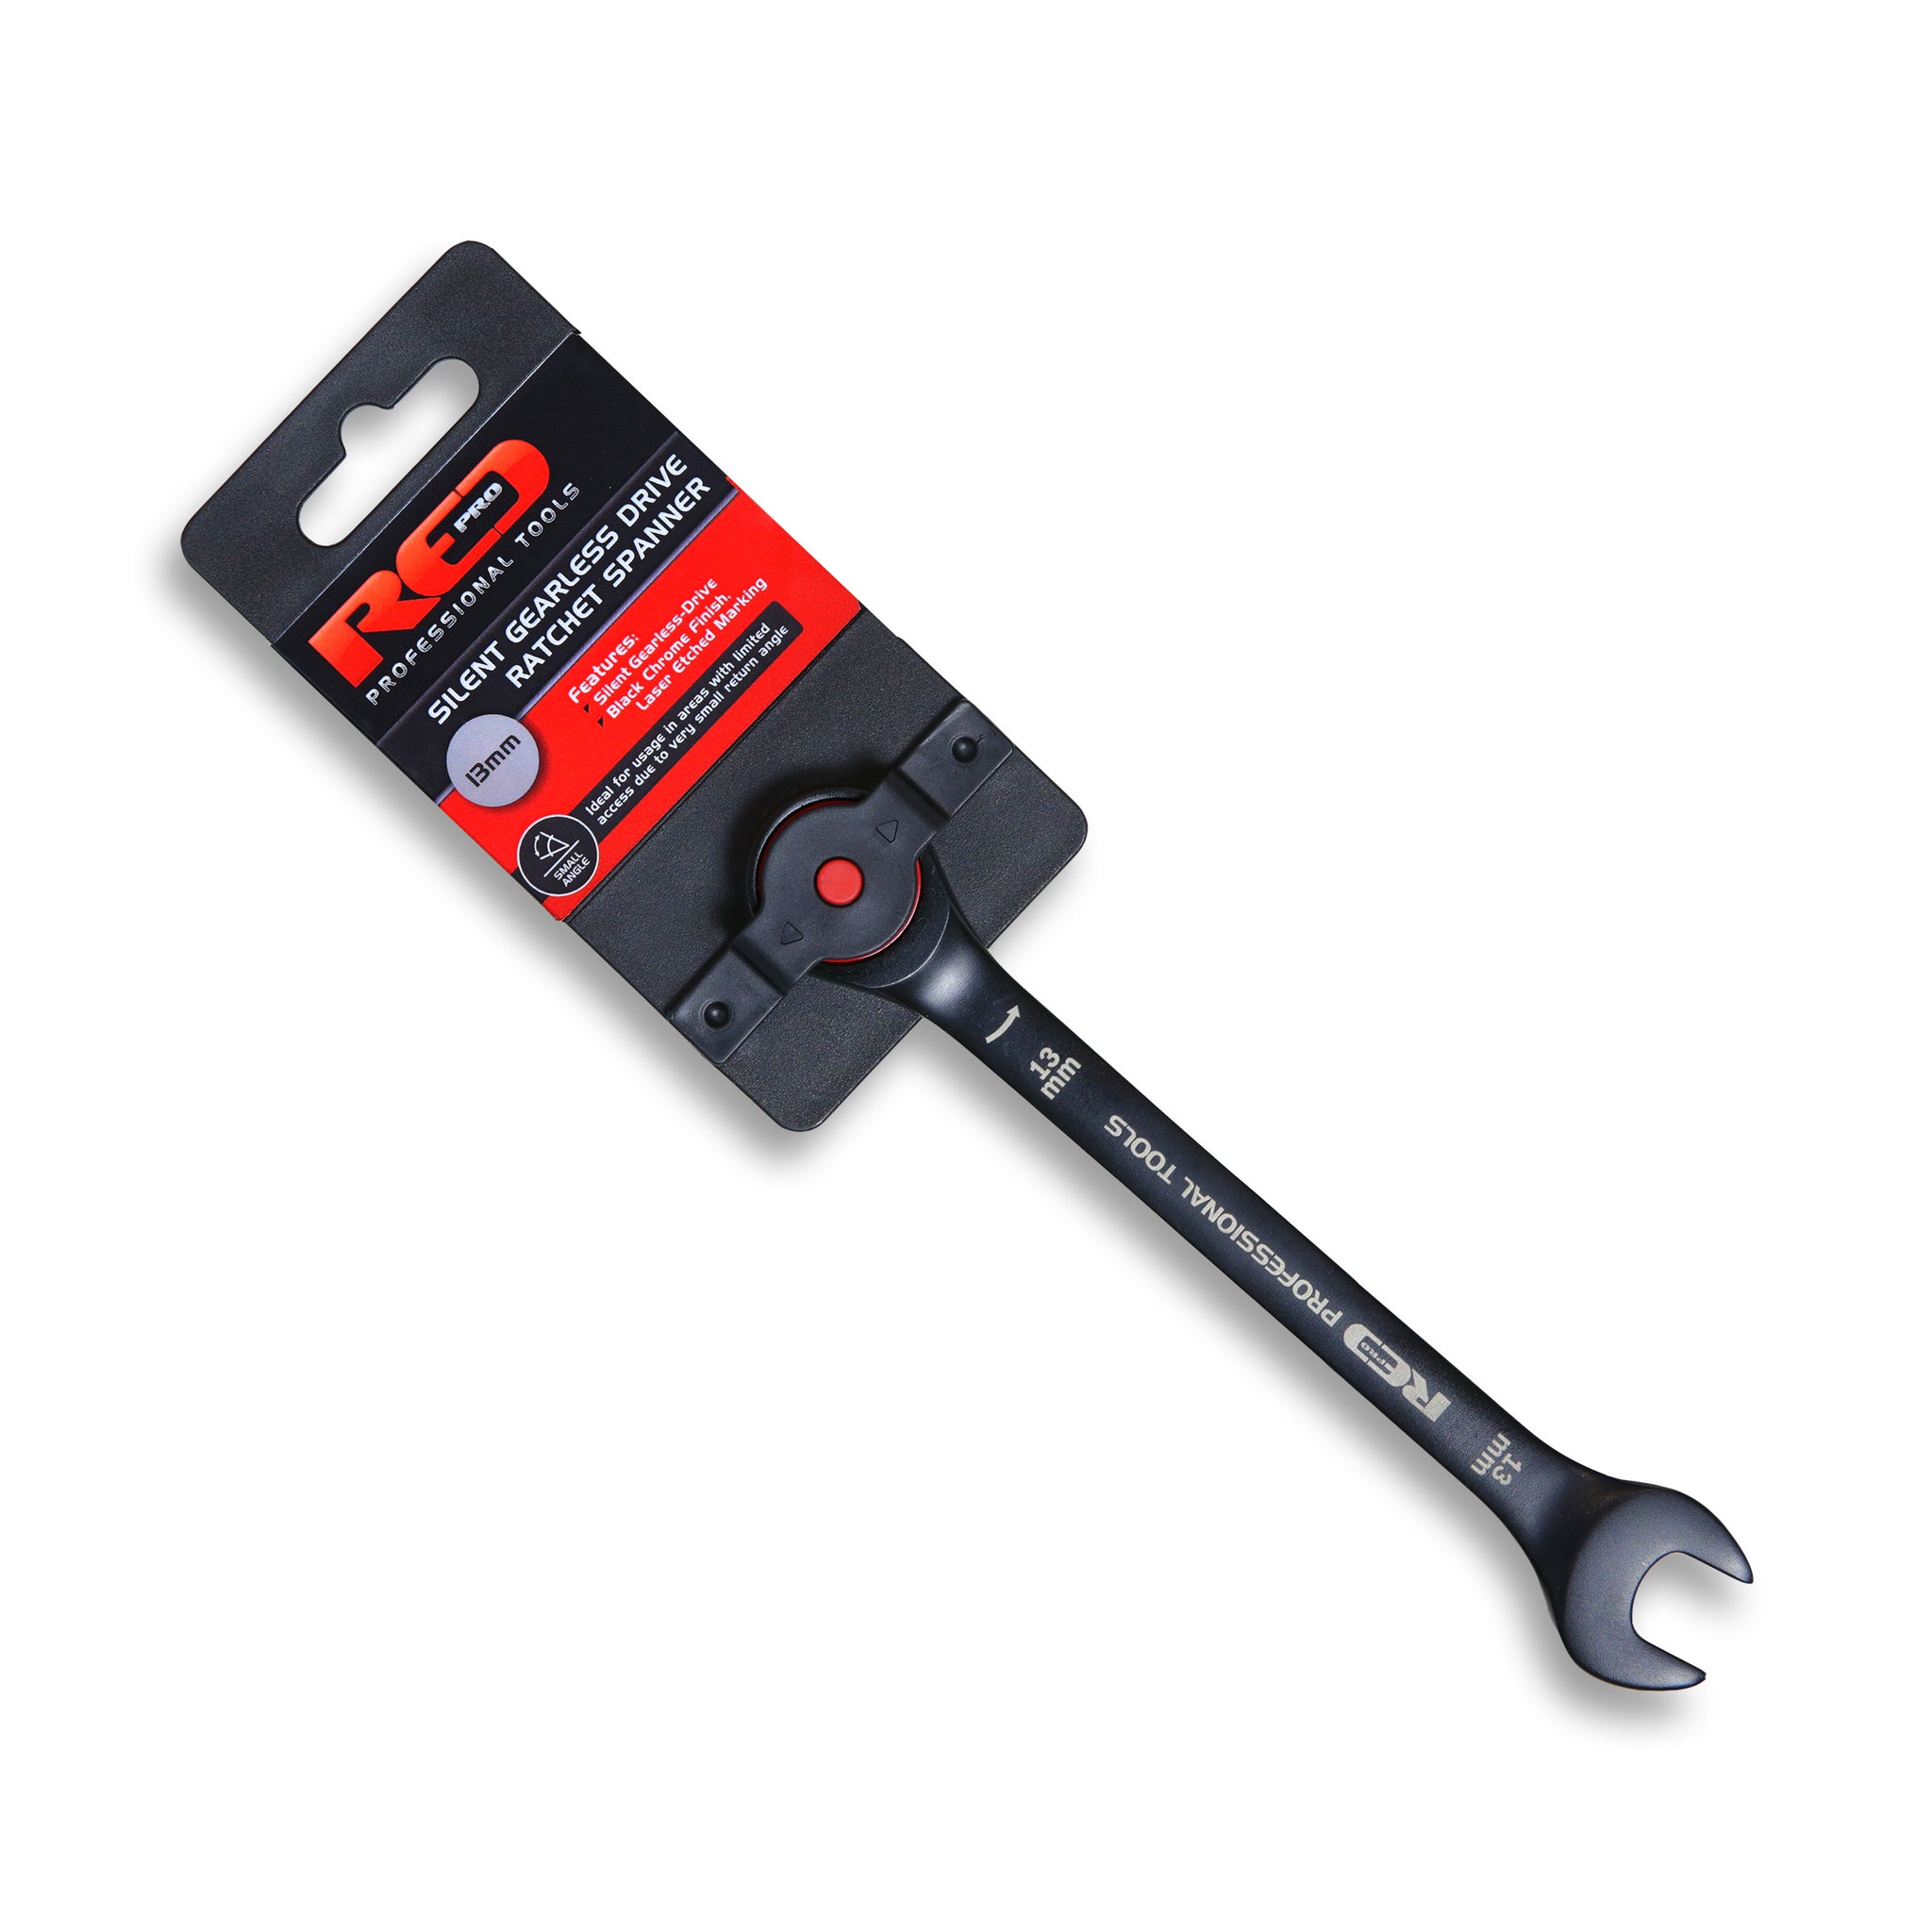 ToolPRO Torque Wrench 1/2 Drive